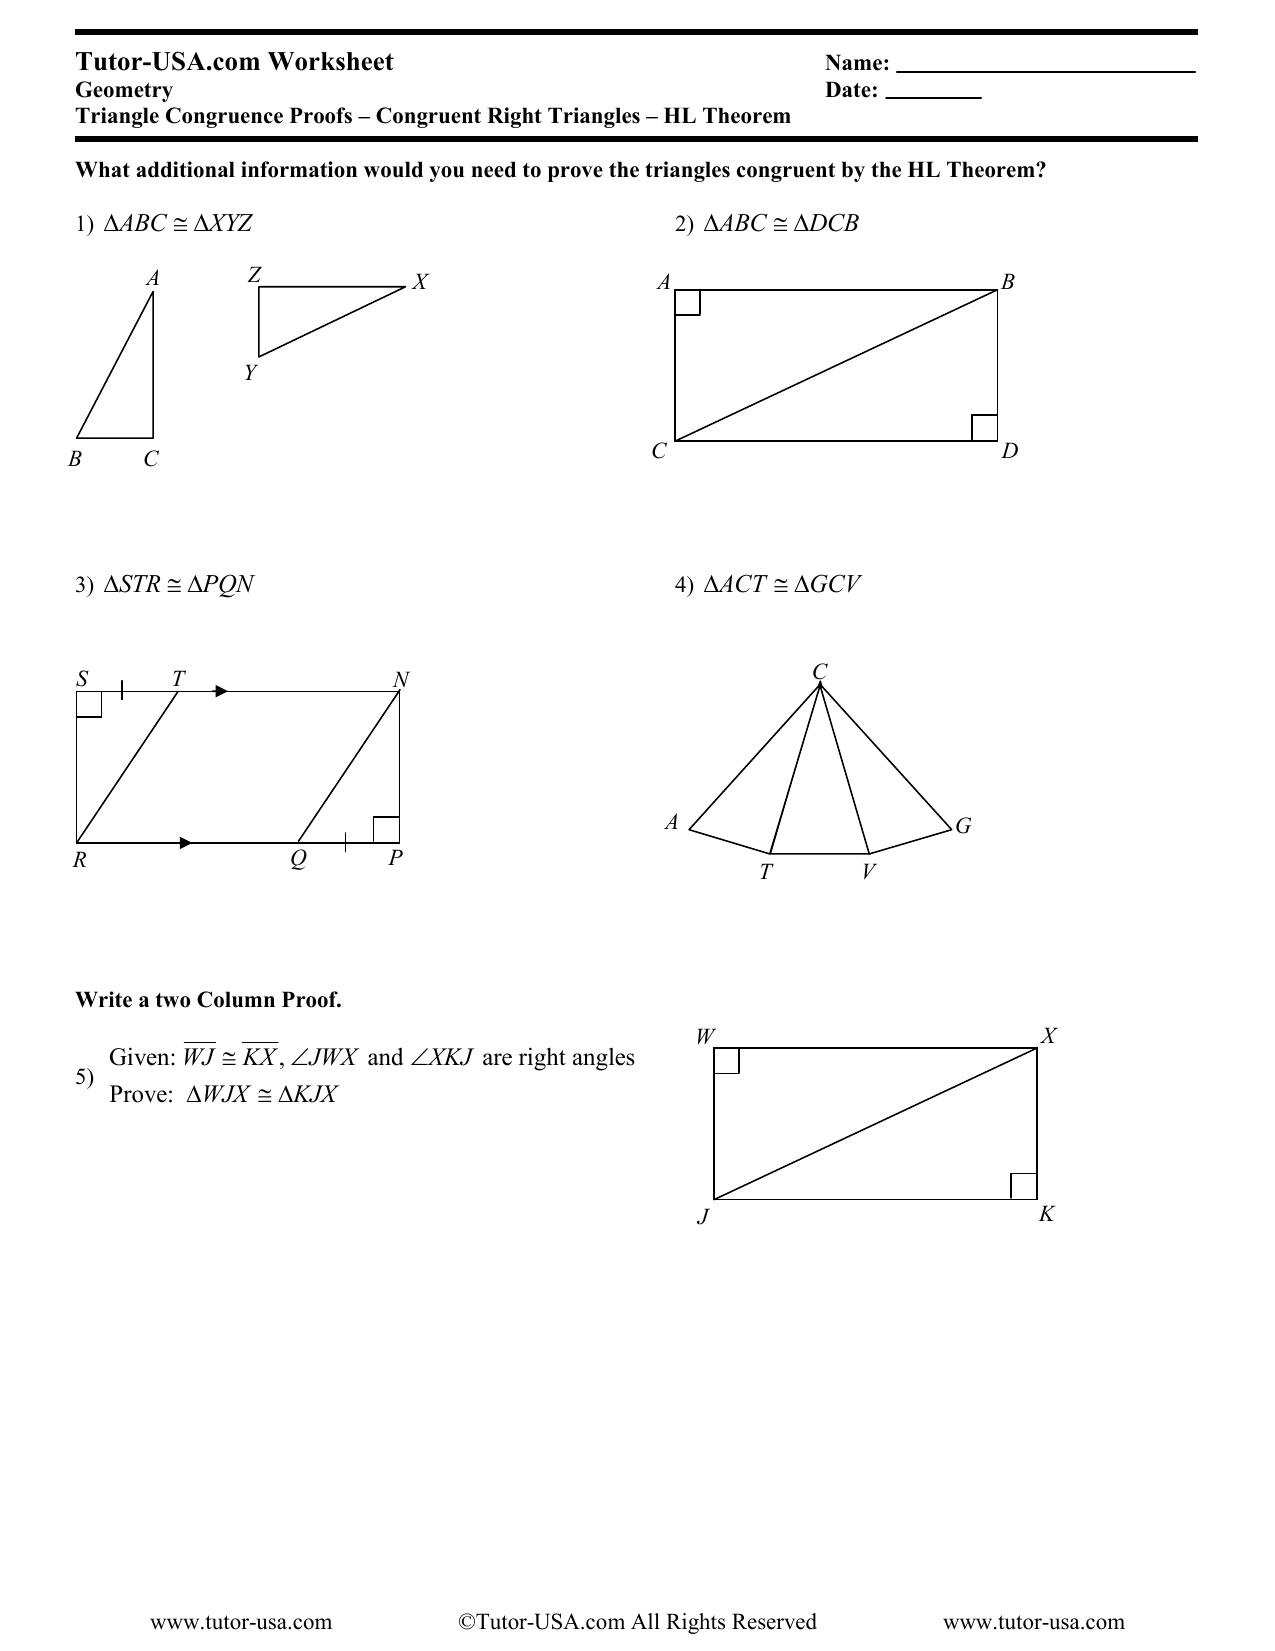 PDF file - Tutor-USA In Triangle Congruence Proofs Worksheet